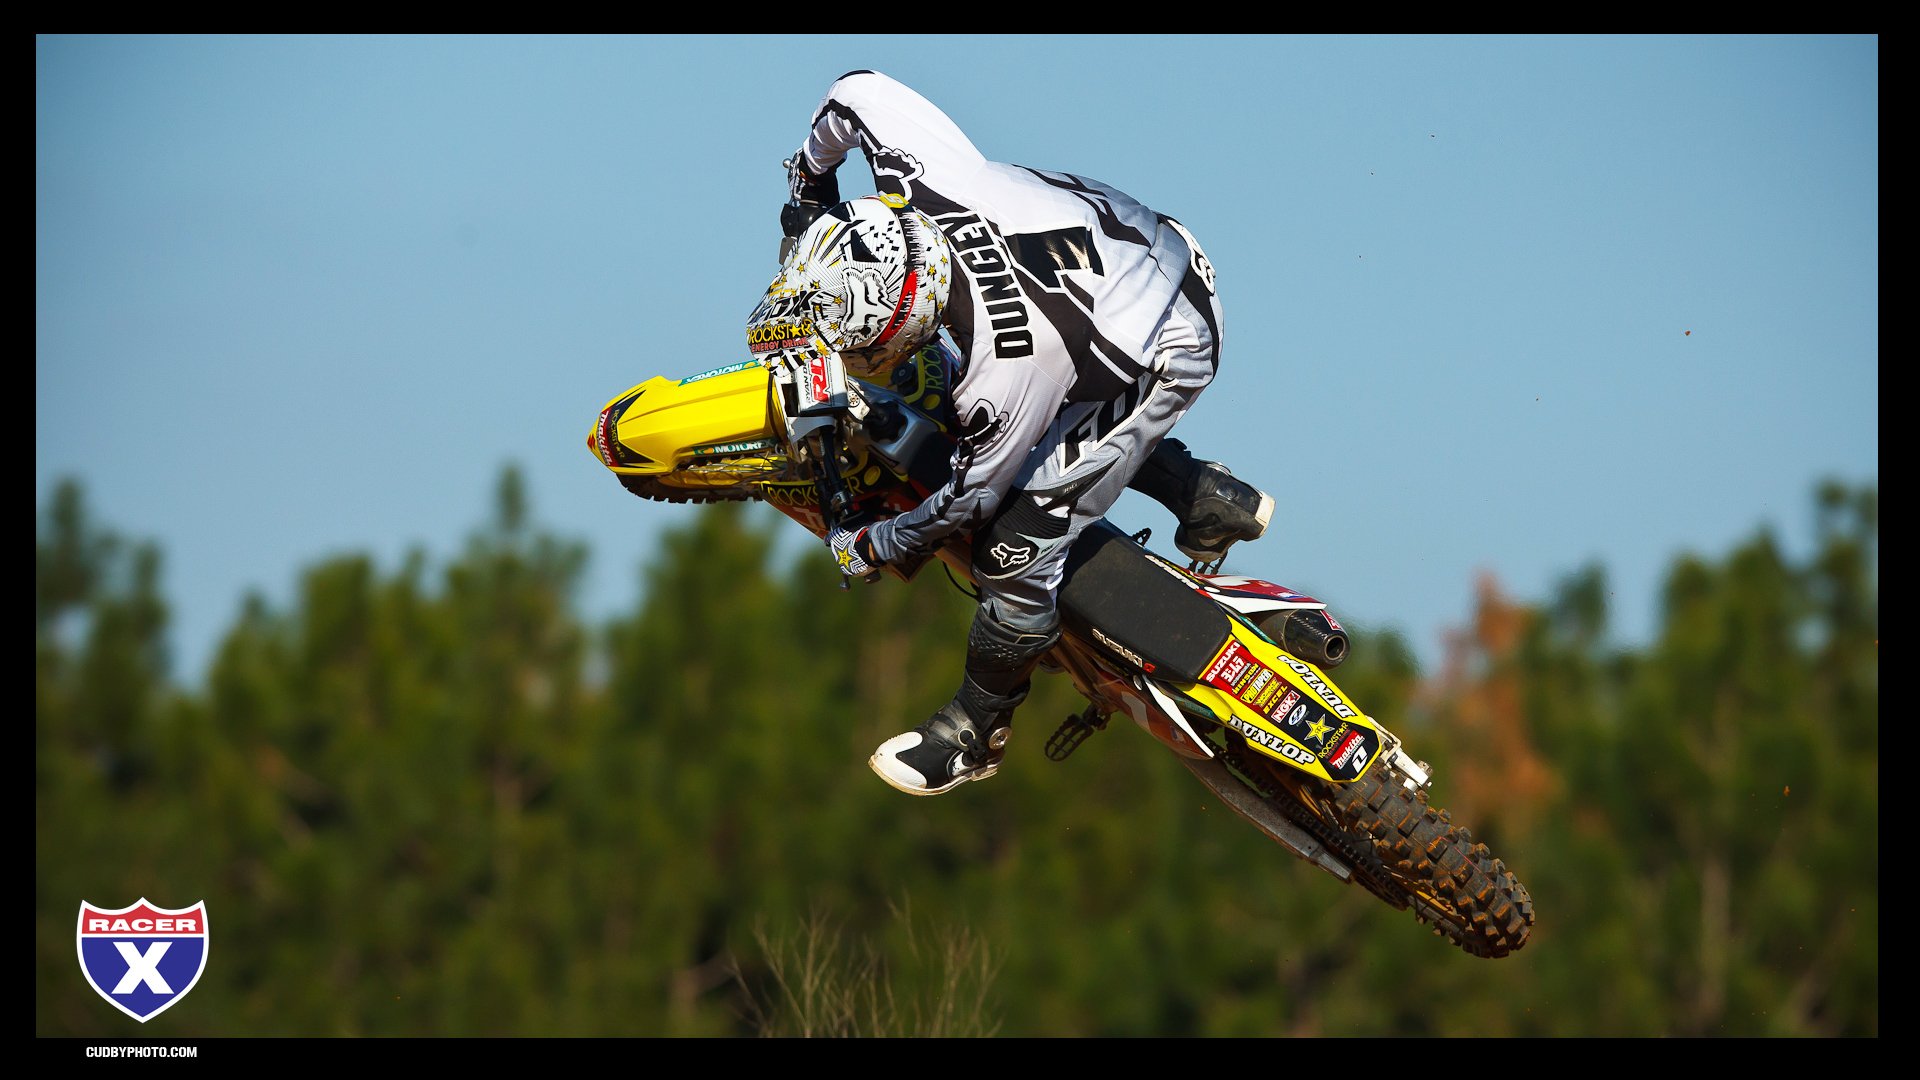 ryan dungey wallpaper,motocross,sports,freestyle motocross,extreme sport,motorcycle racing